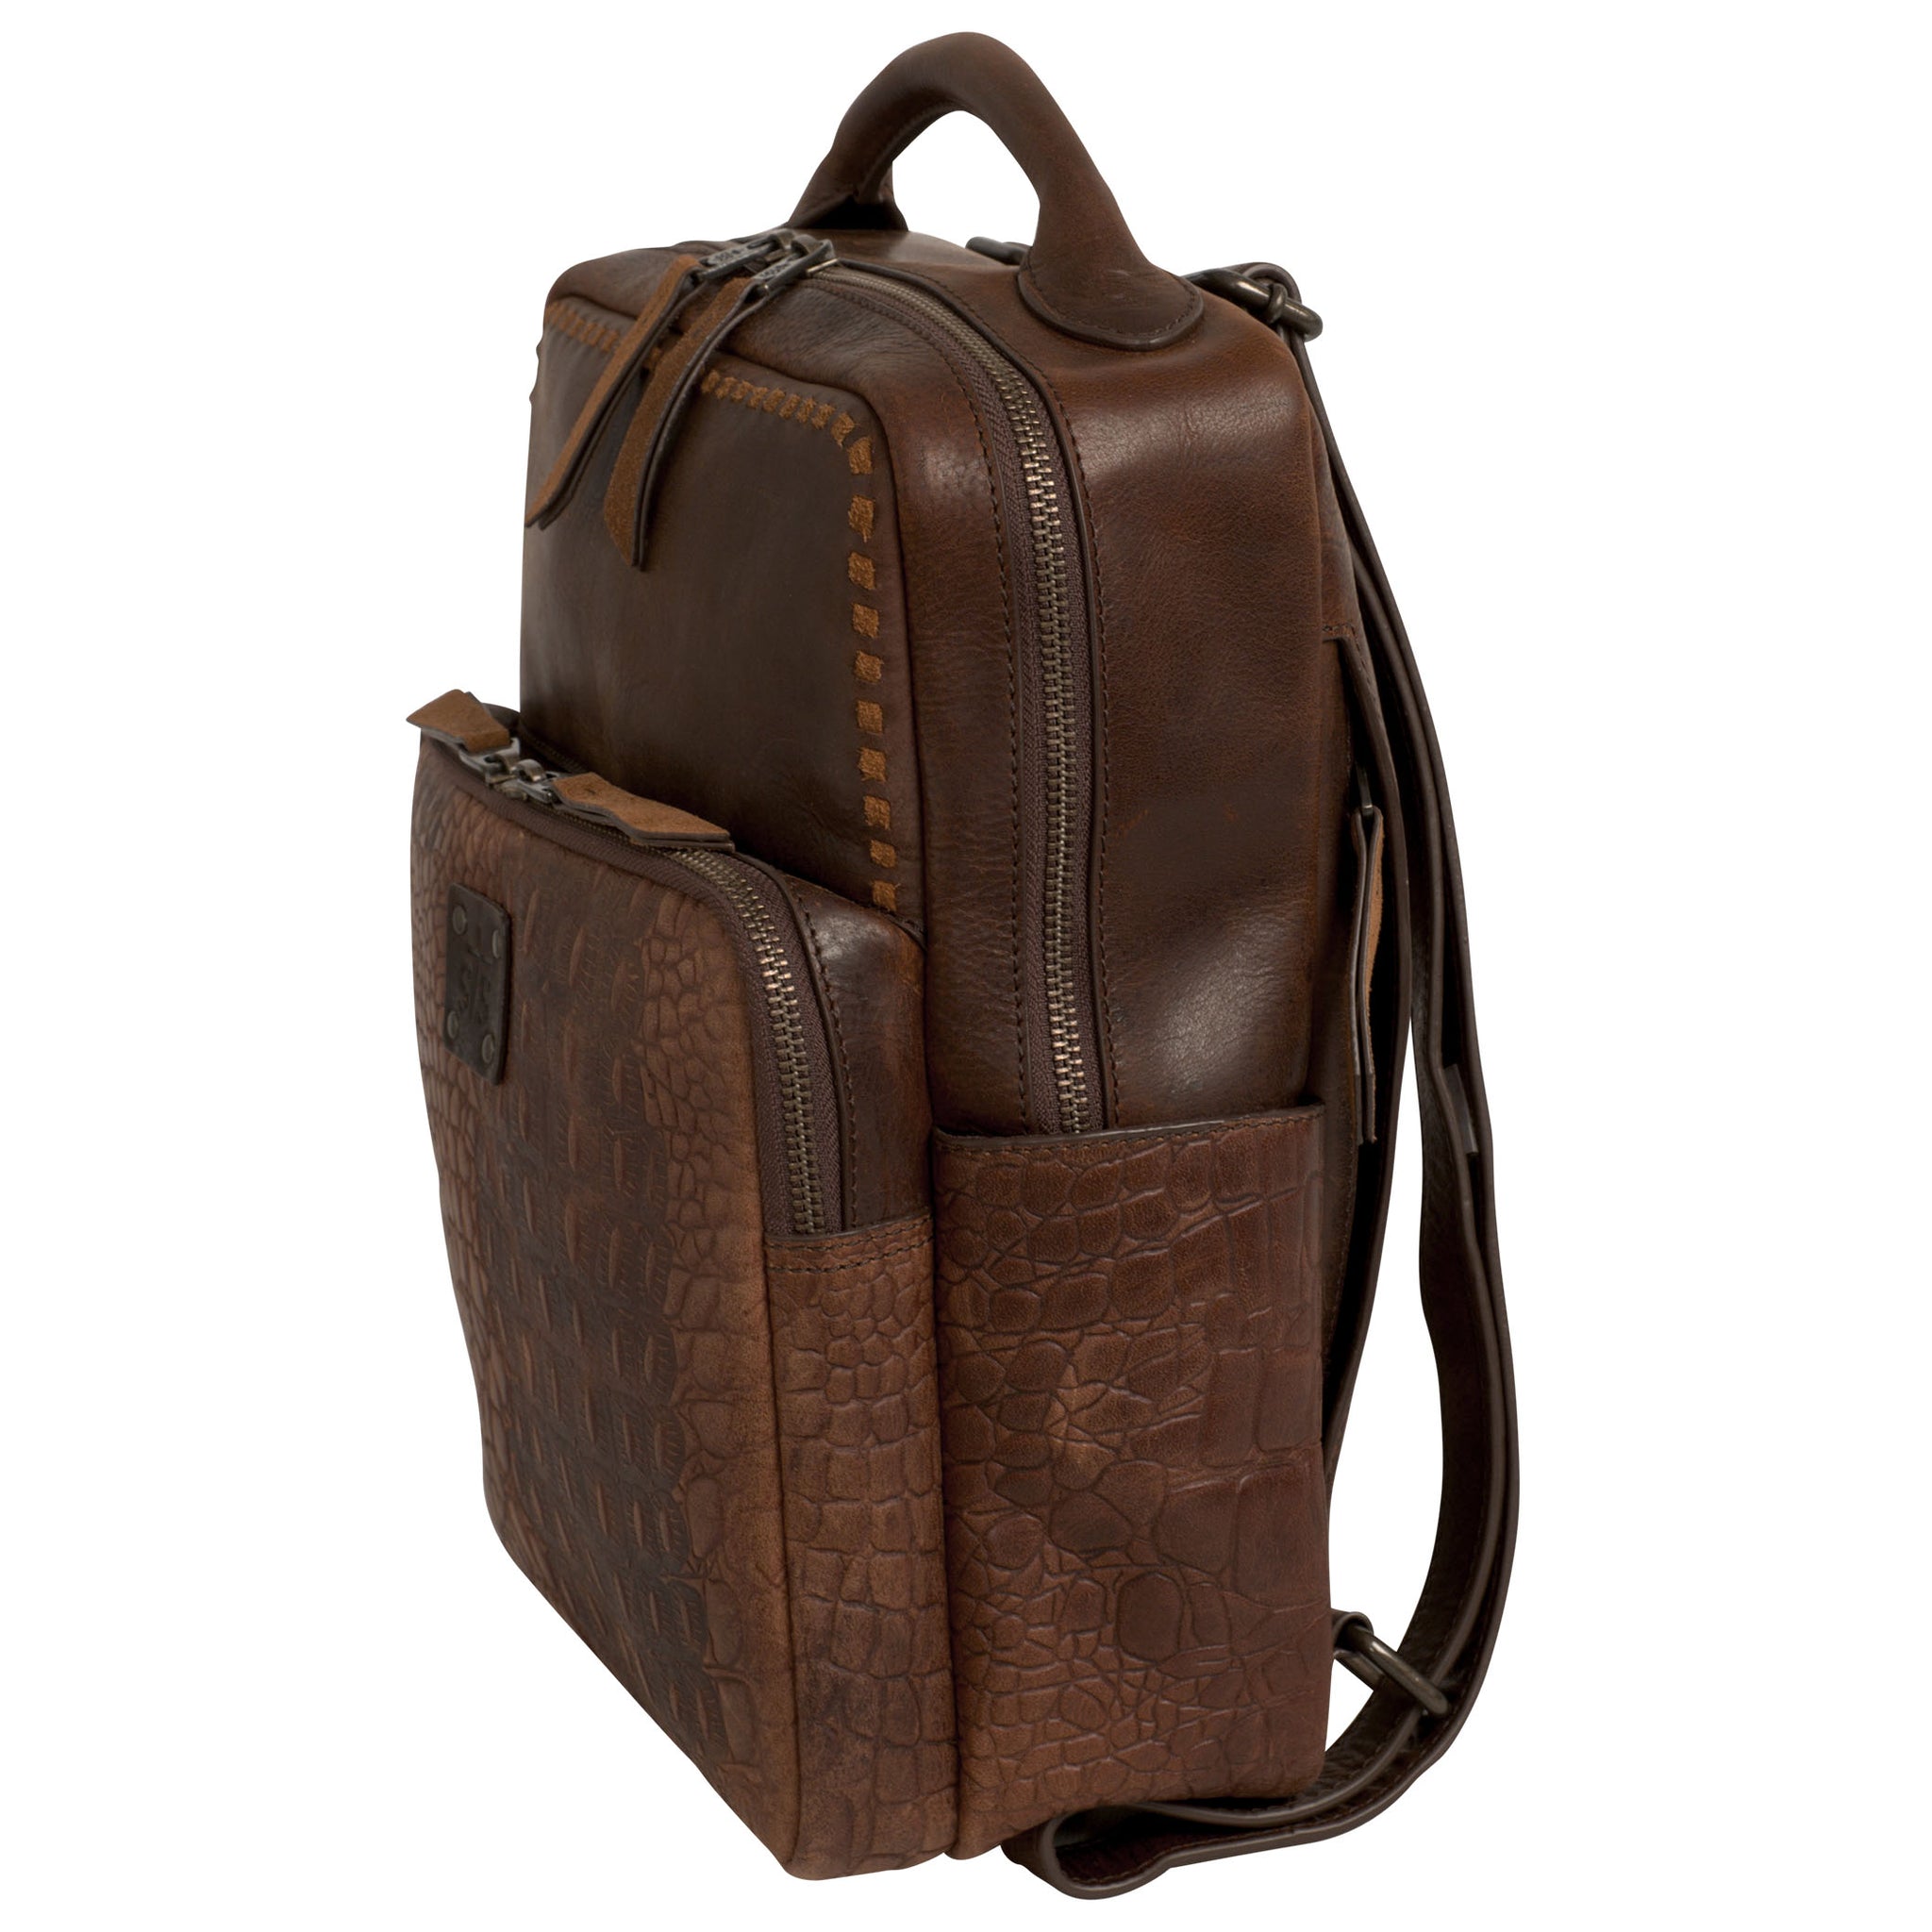 STS Ranchwear Catalina Croc Mini Backpack in Brown